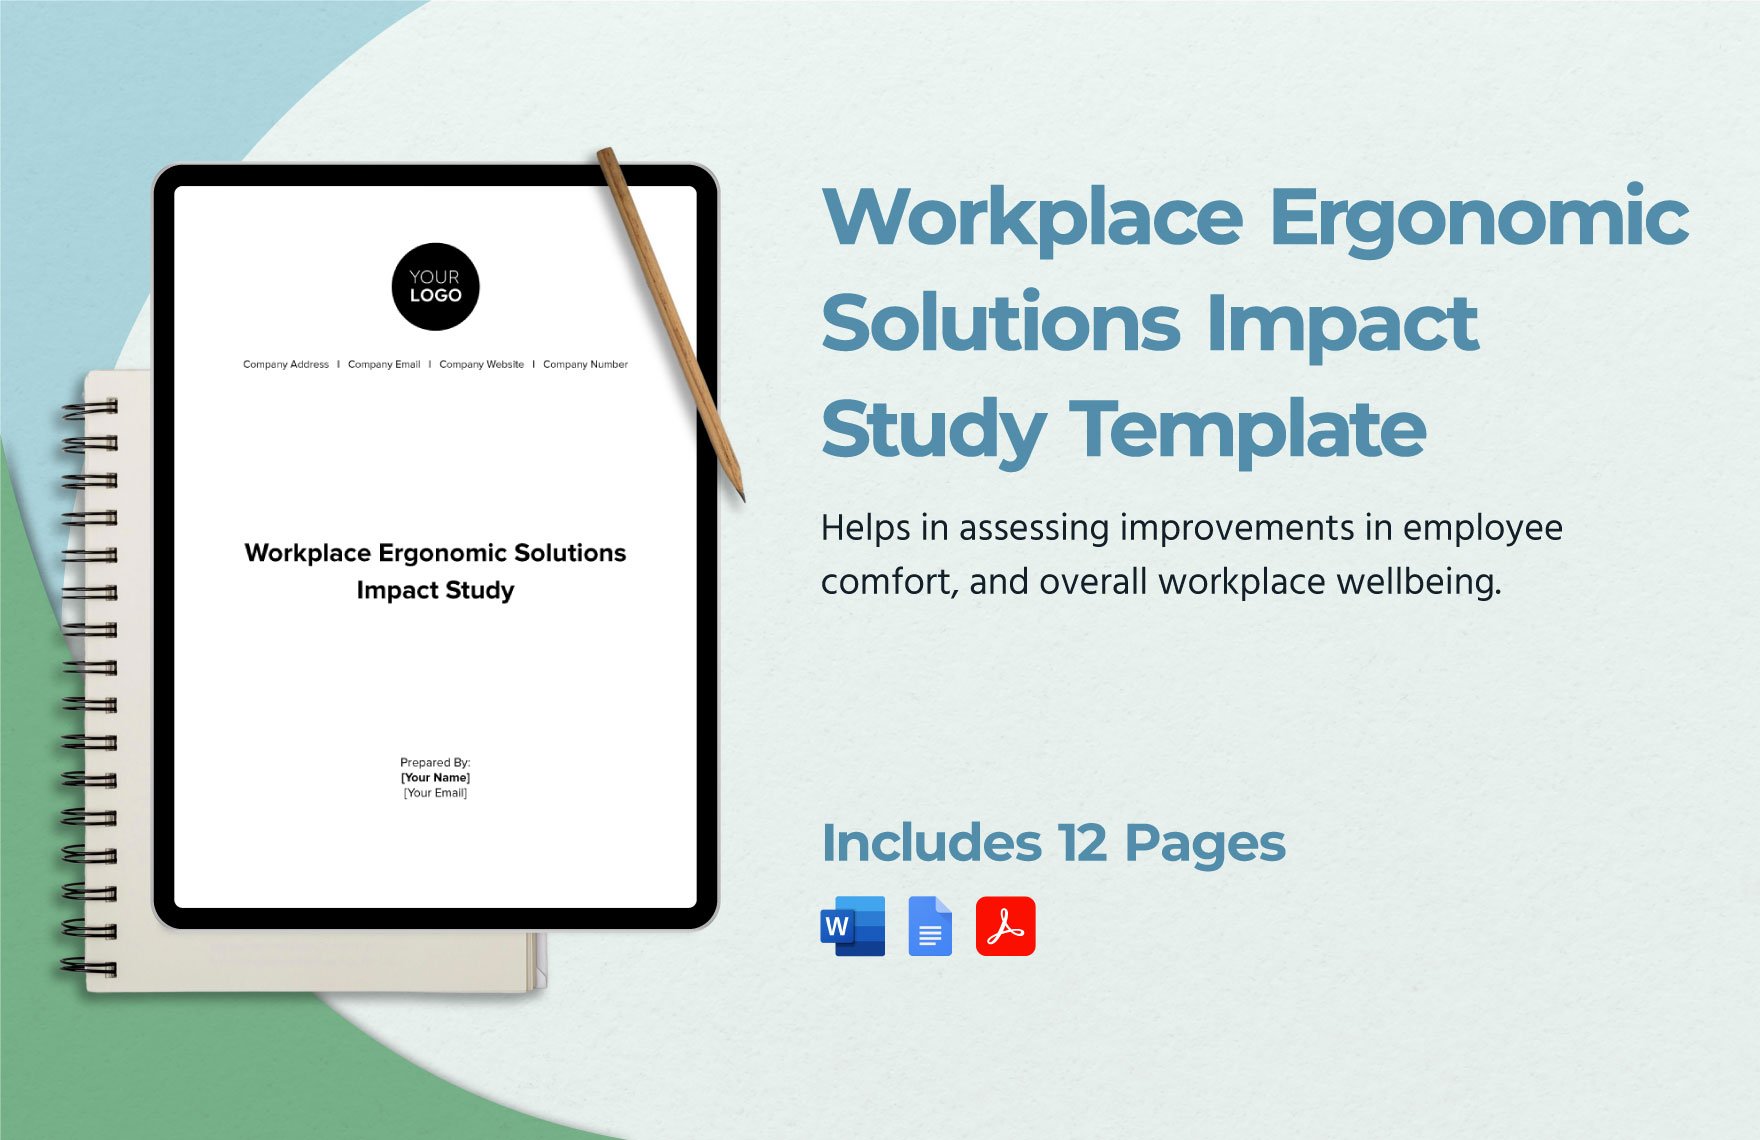 Workplace Ergonomic Solutions Impact Study Template